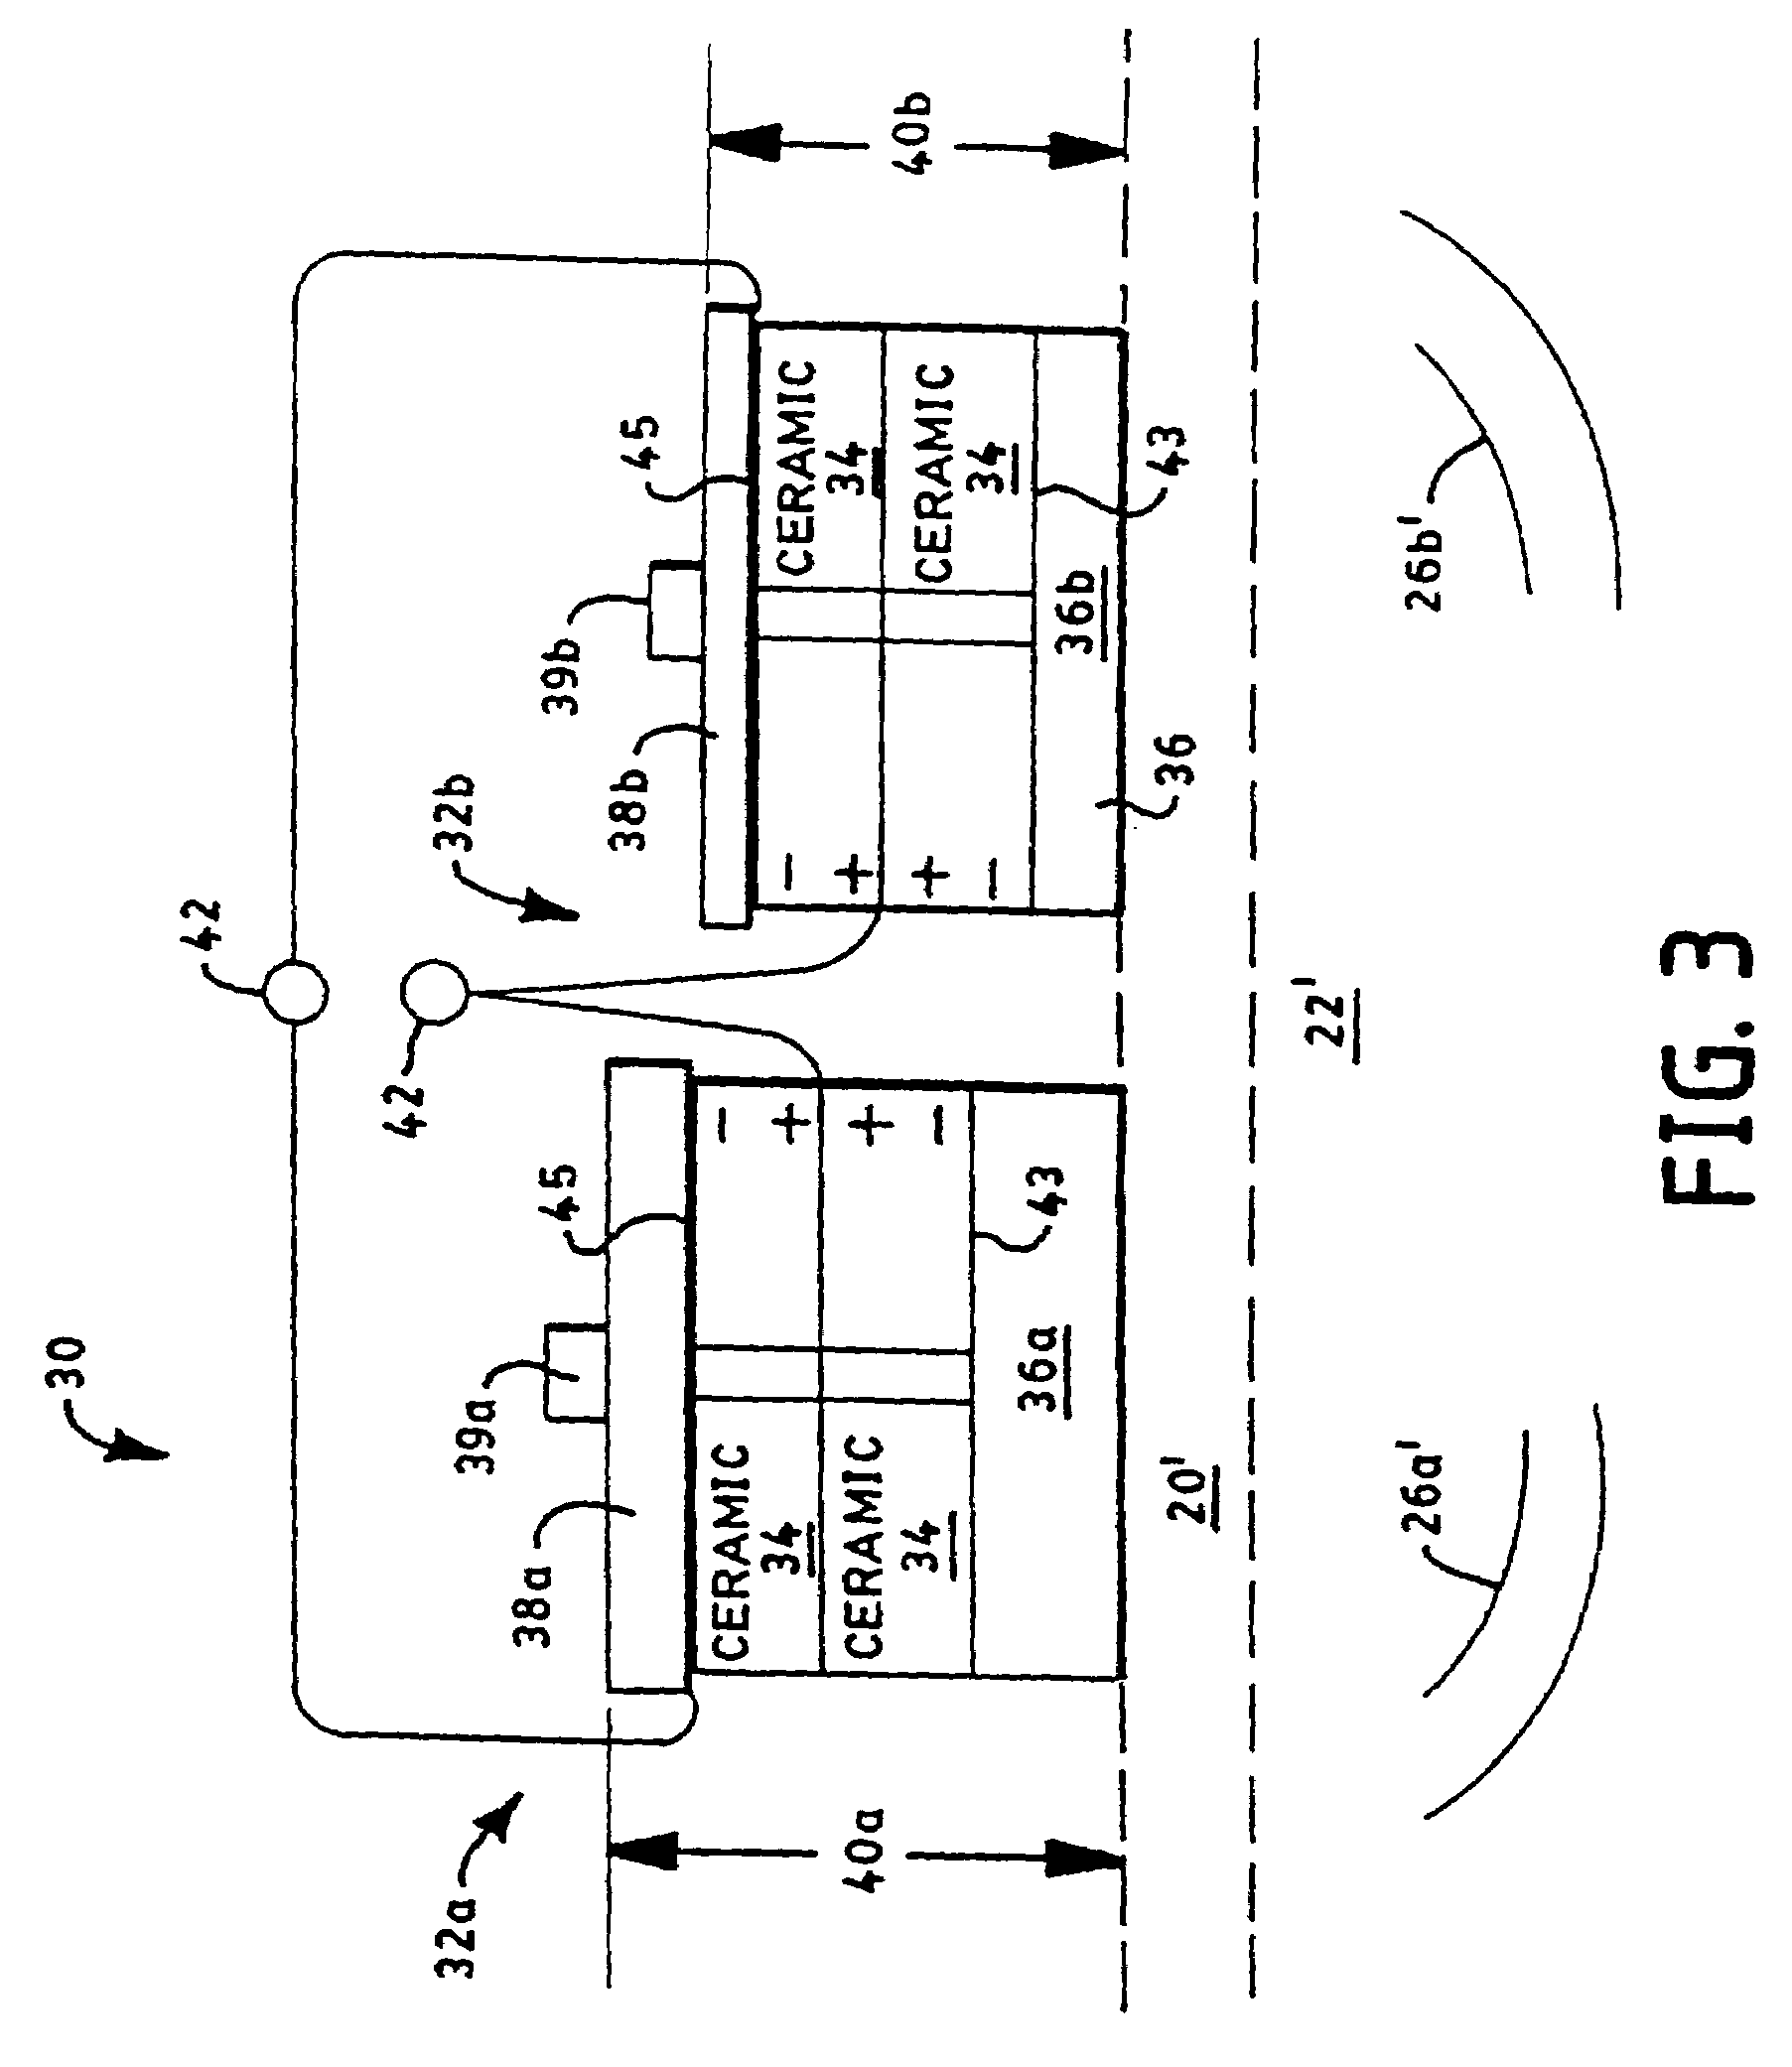 Apparatus, circuitry, signals and methods for cleaning and/or processing with sound